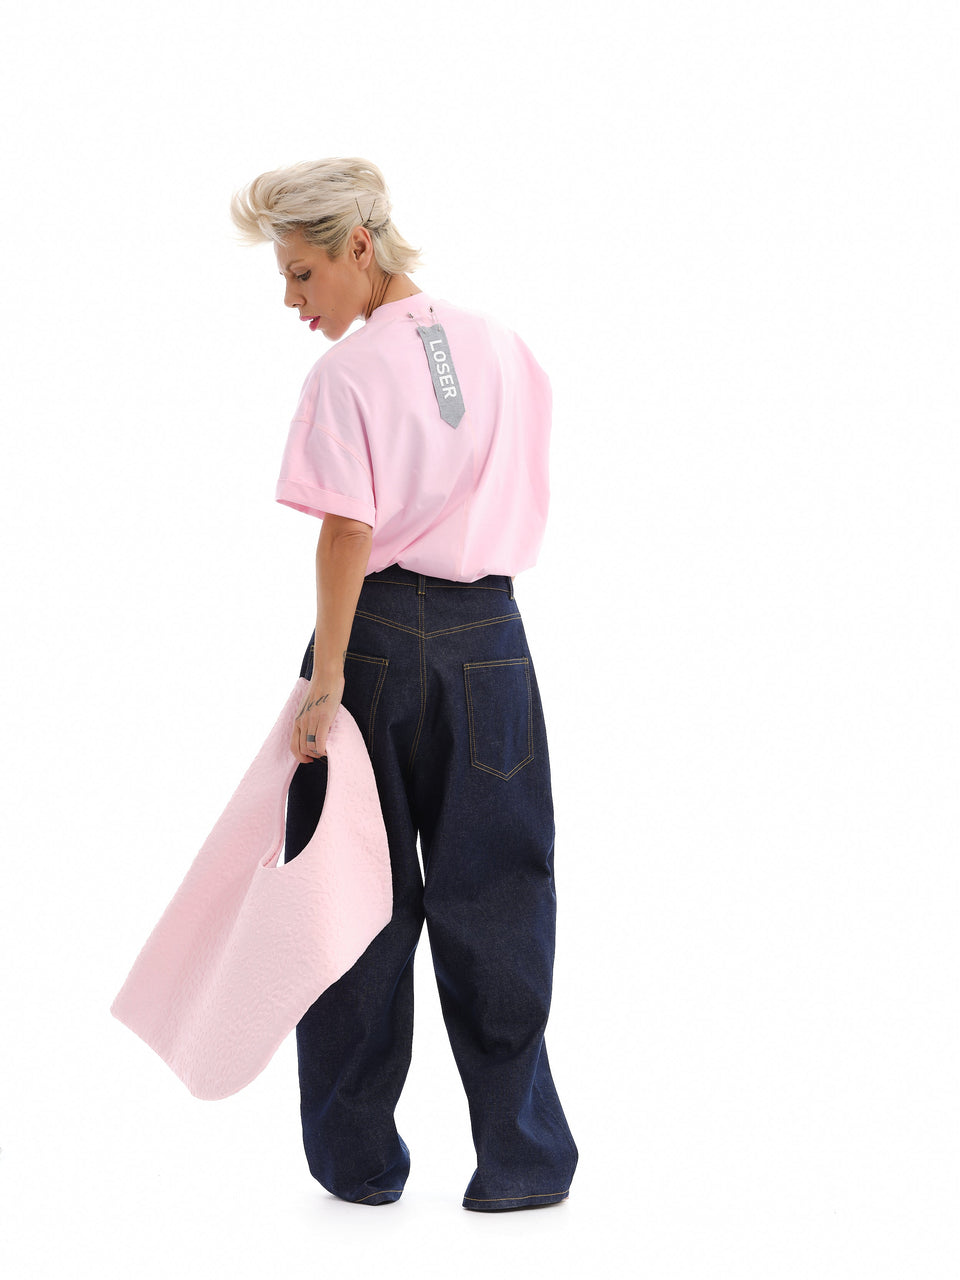 Pink Graphic Tee & Baggy Jeans Outfit Set L/XL / 2XL/3XL